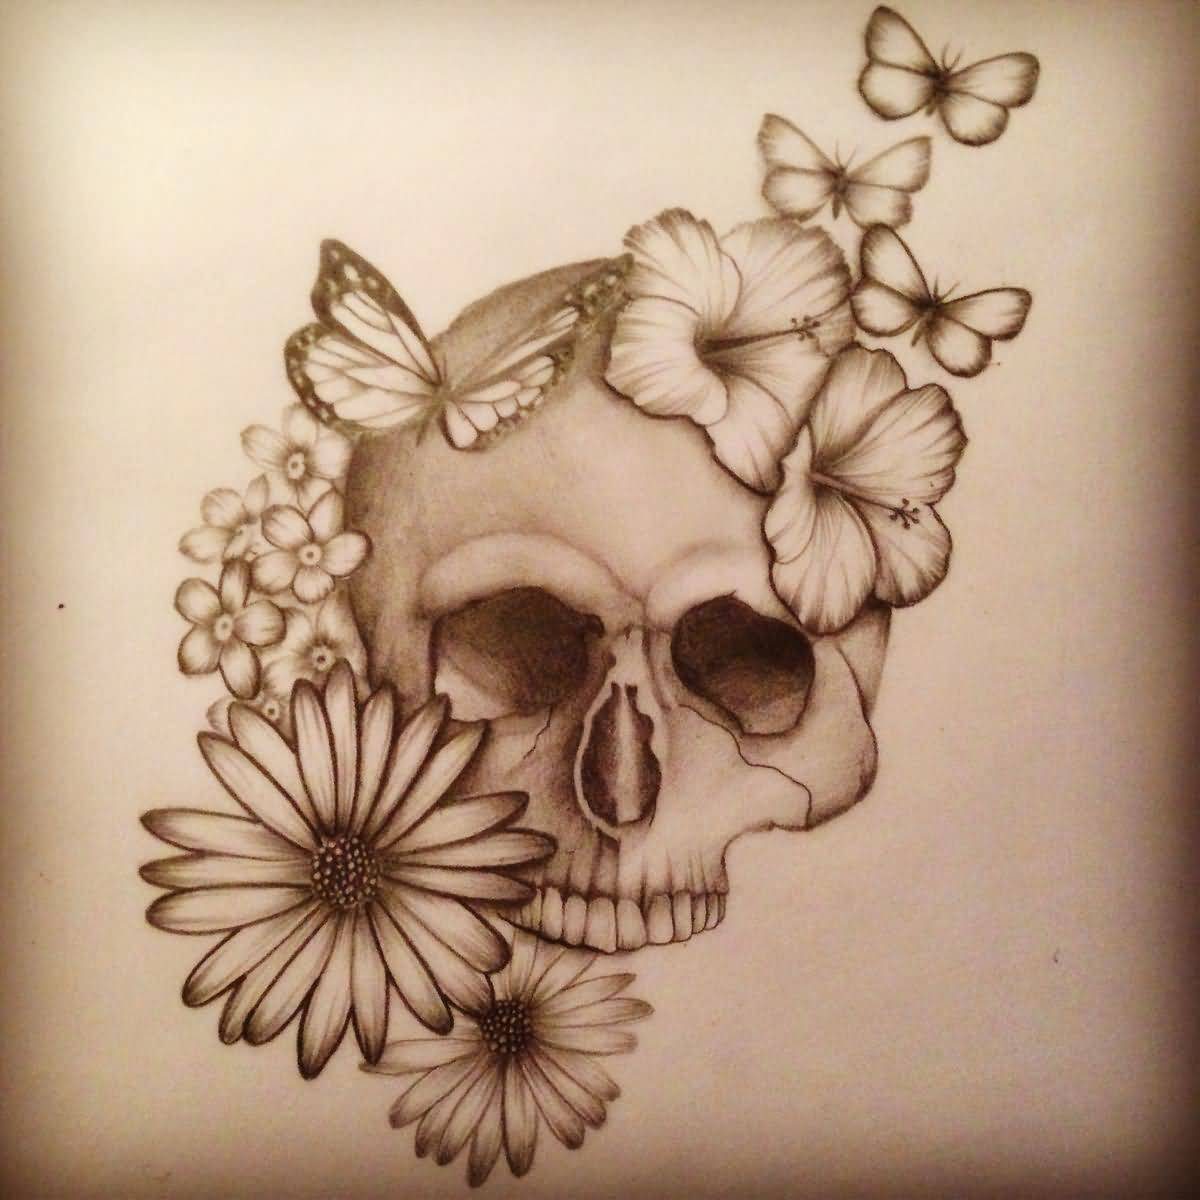 Grey Shaded Flower Skull With Butterflies Tattoo Design with regard to sizing 1200 X 1200